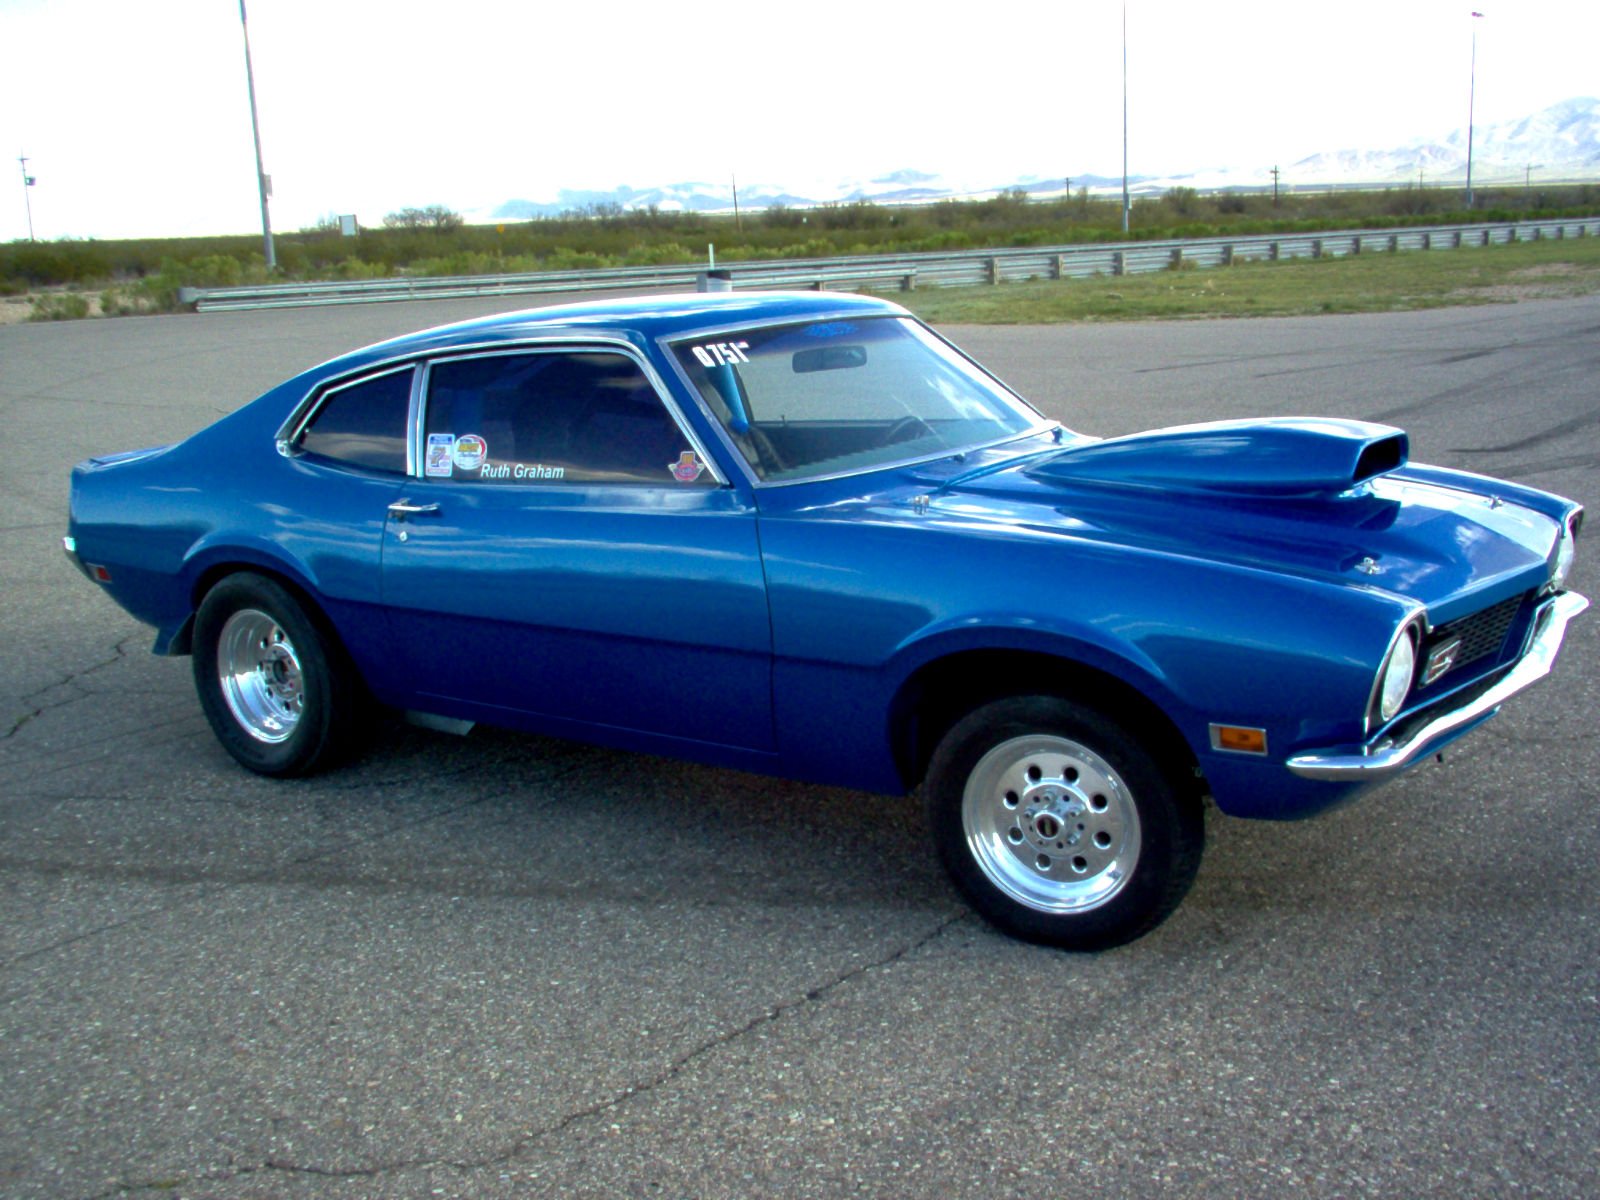 FORD MAVERICK muscle classic hot rod rods hh wallpaper 1600x1200